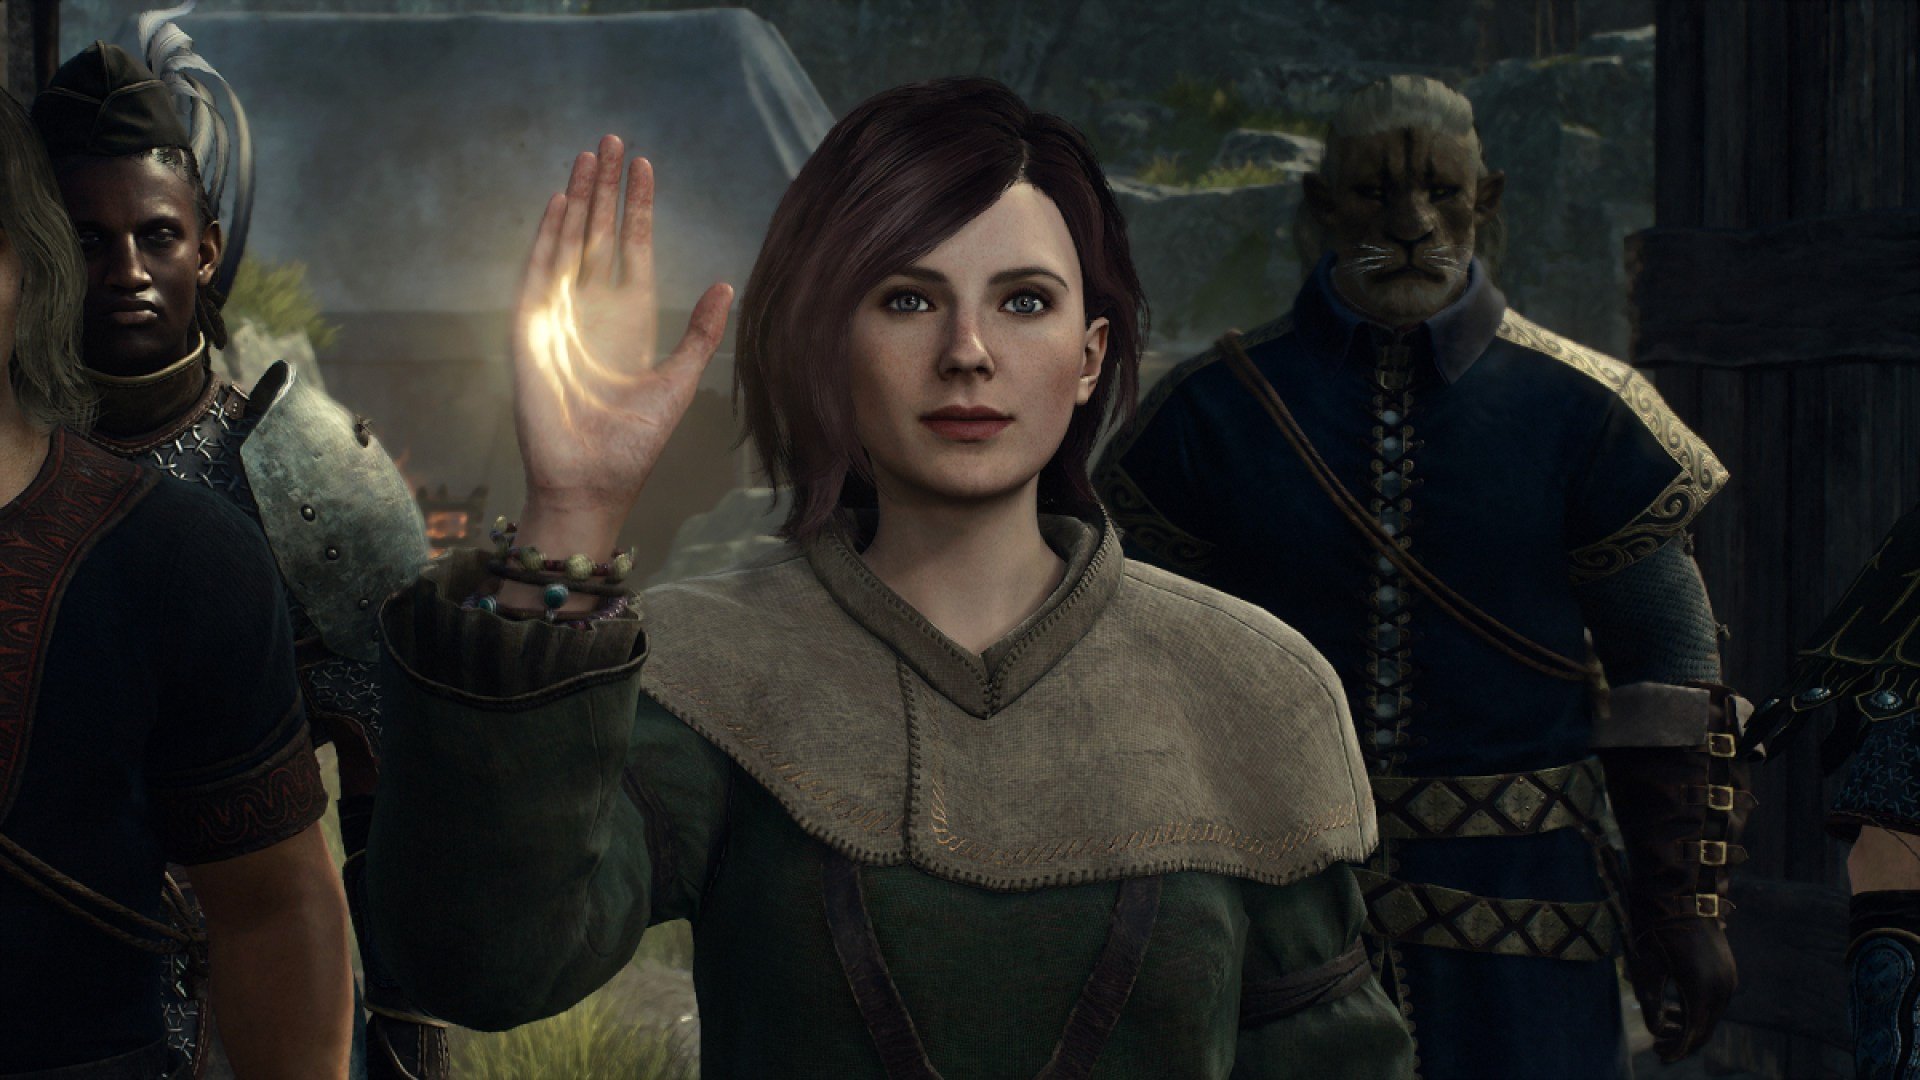 A mage pawn saluting the Arisen.